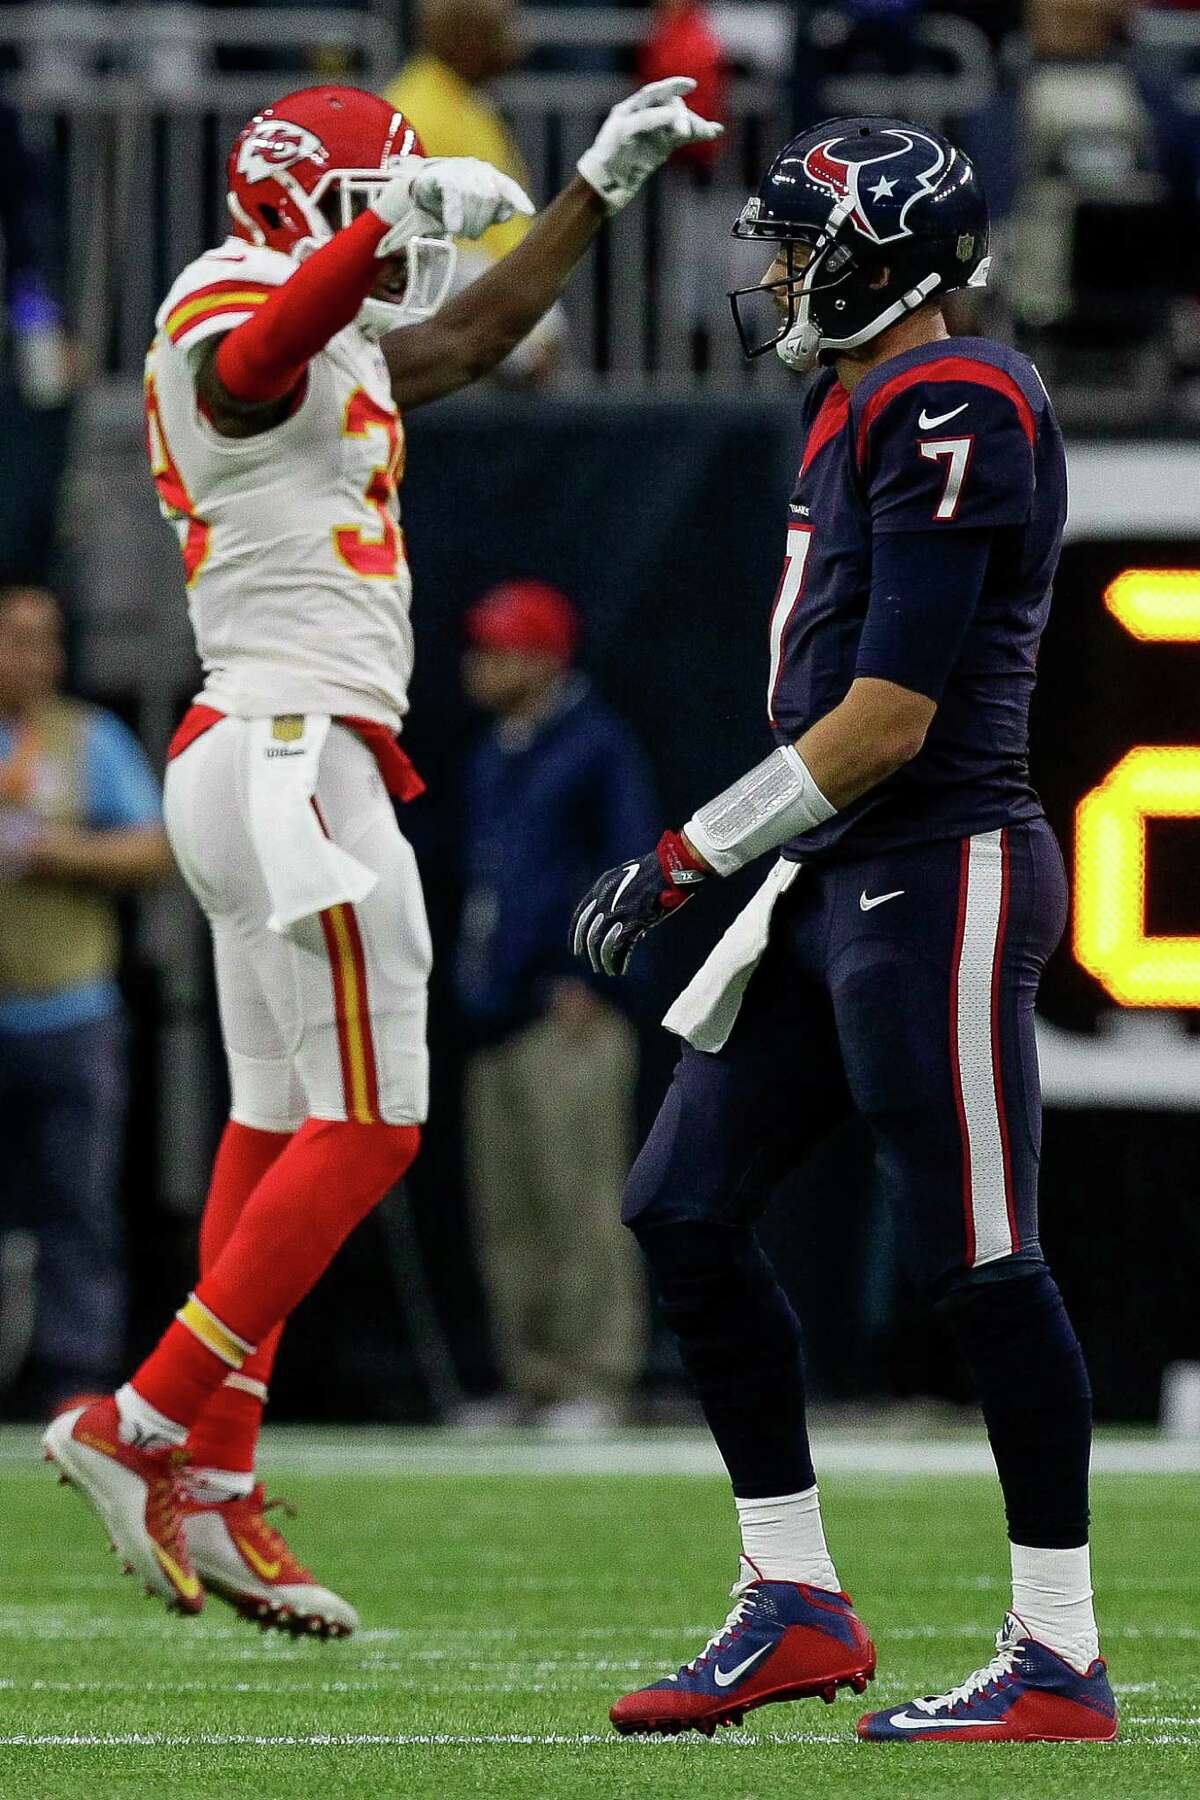 ﻿Chiefs free safety Husain Abdullah, left, celebrates a fumble recovery in the first quarter - one of Texans quarterback Brian Hoyer's five turnovers during Saturday's 30-0 blowout.﻿